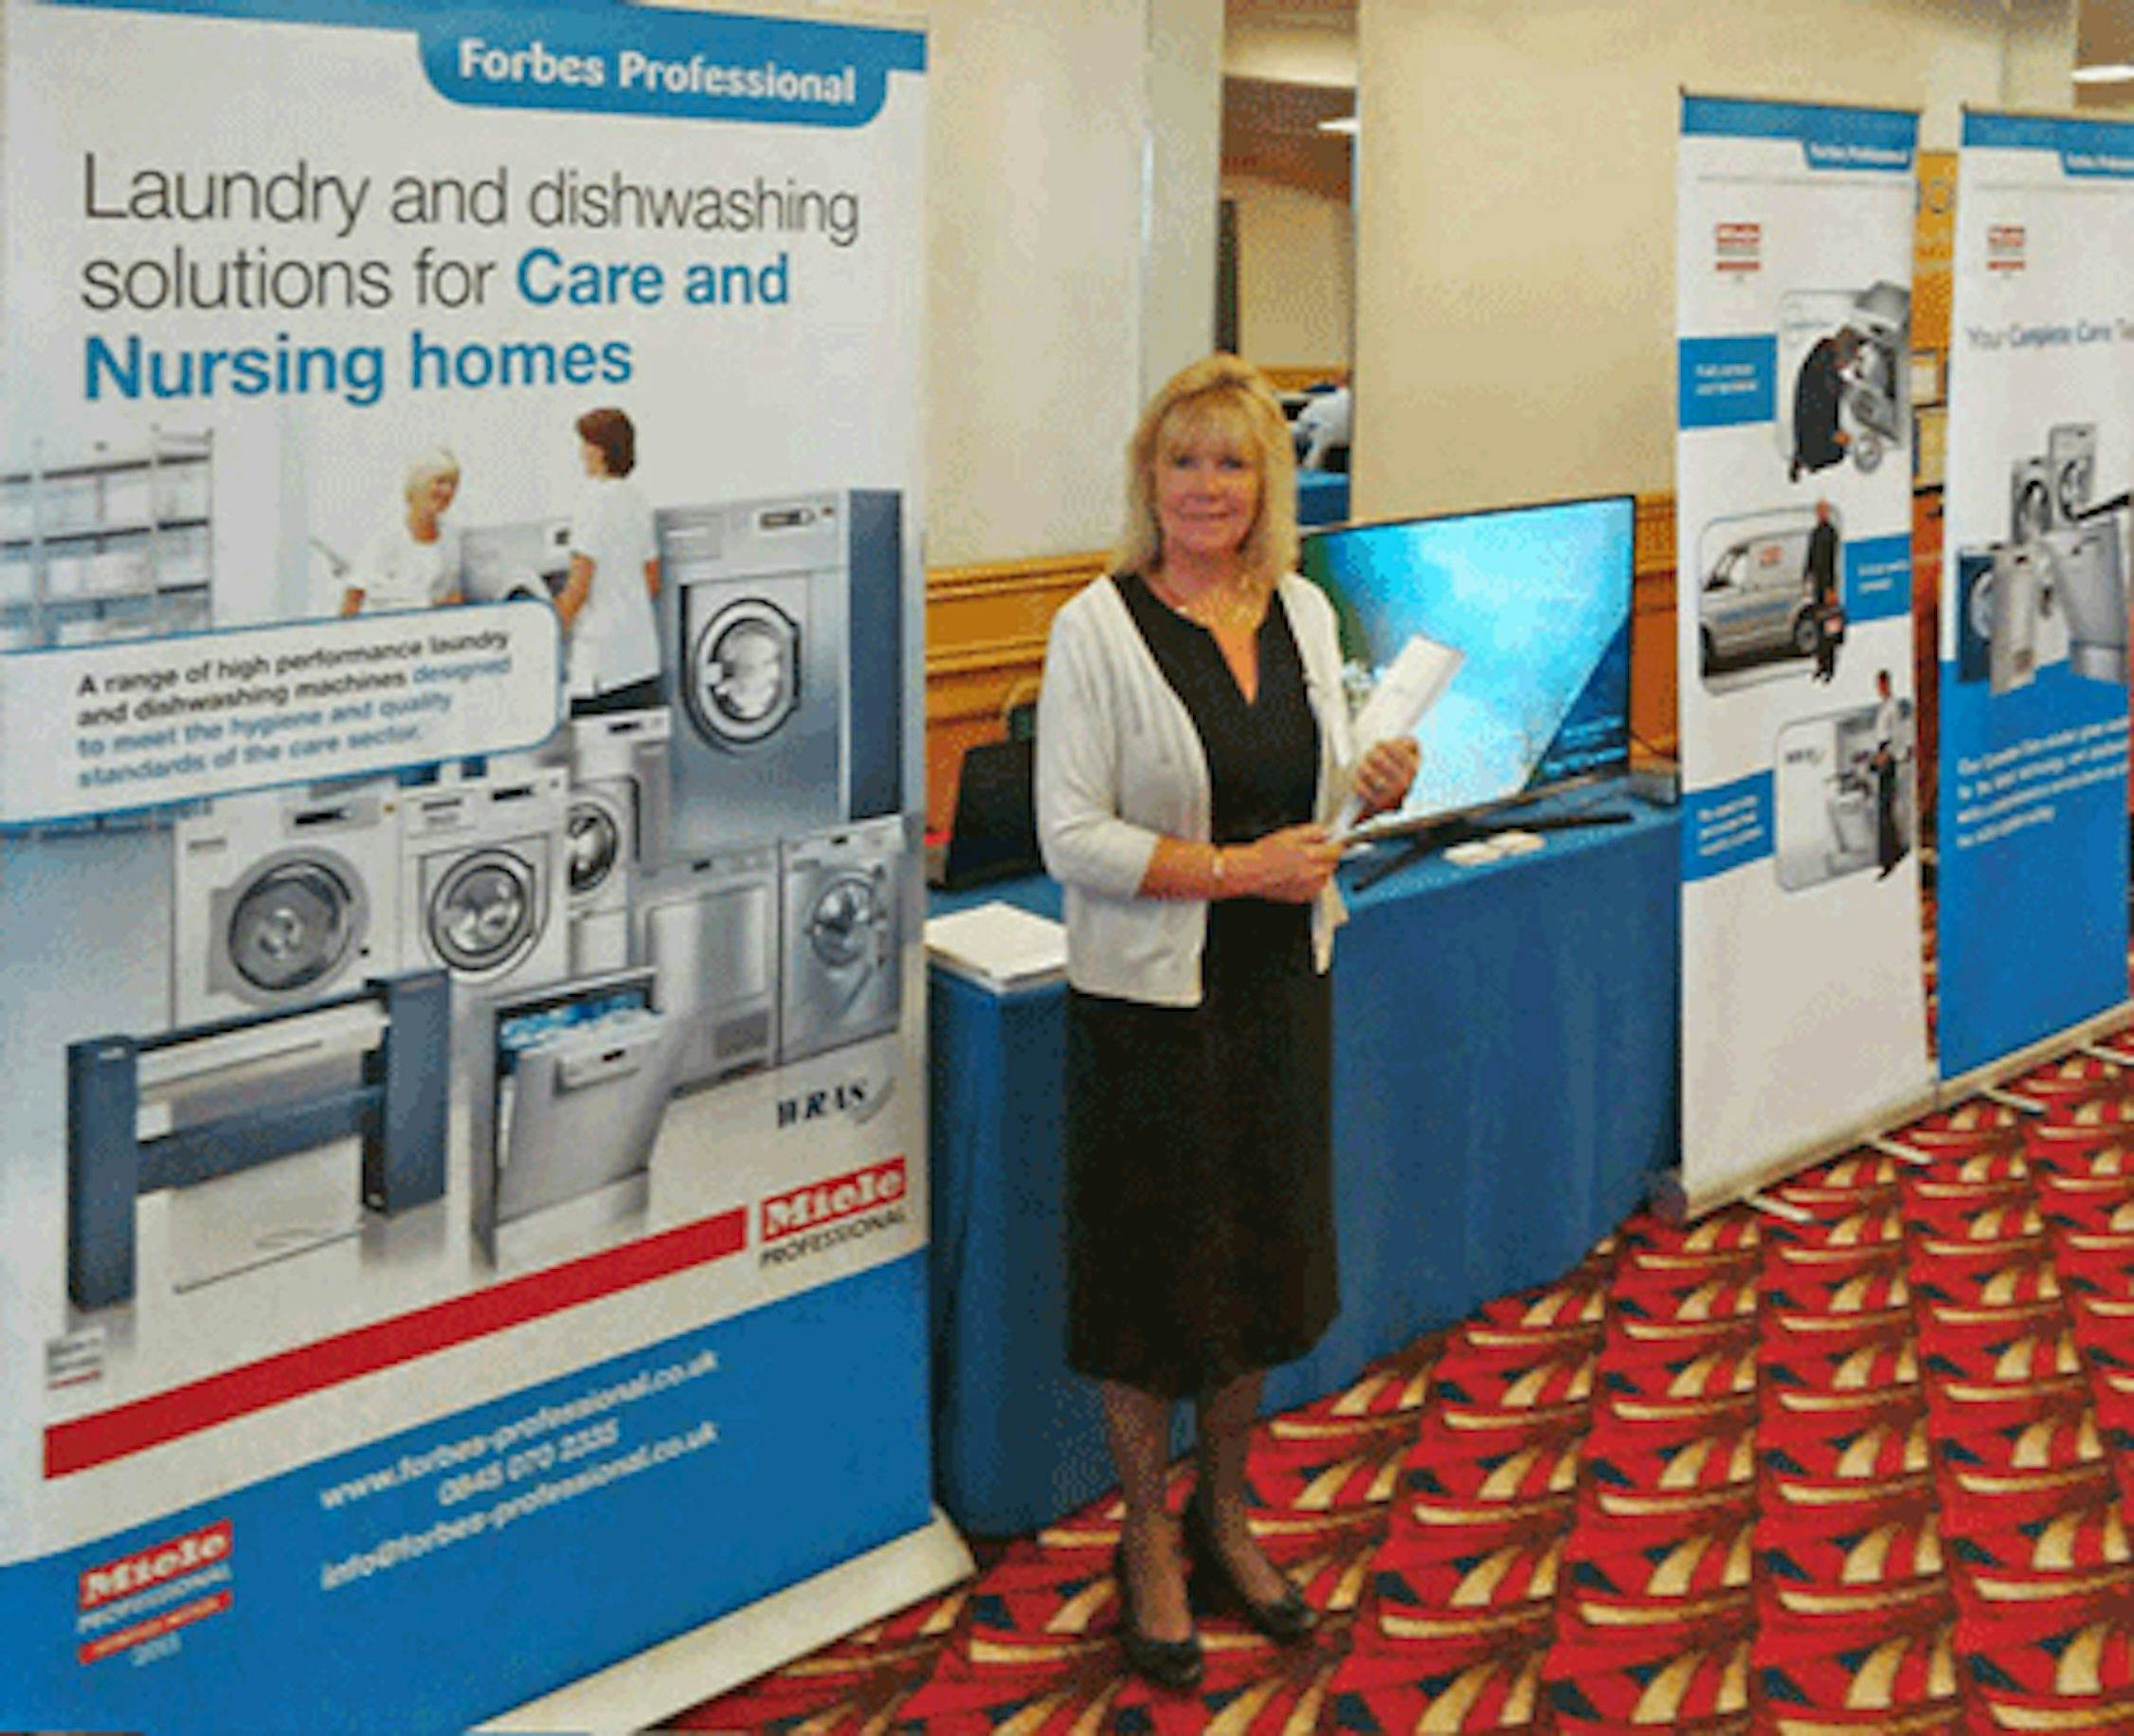 Forbes Professional Welcomes Care Providers at the Caring UK Conference and Exhibition